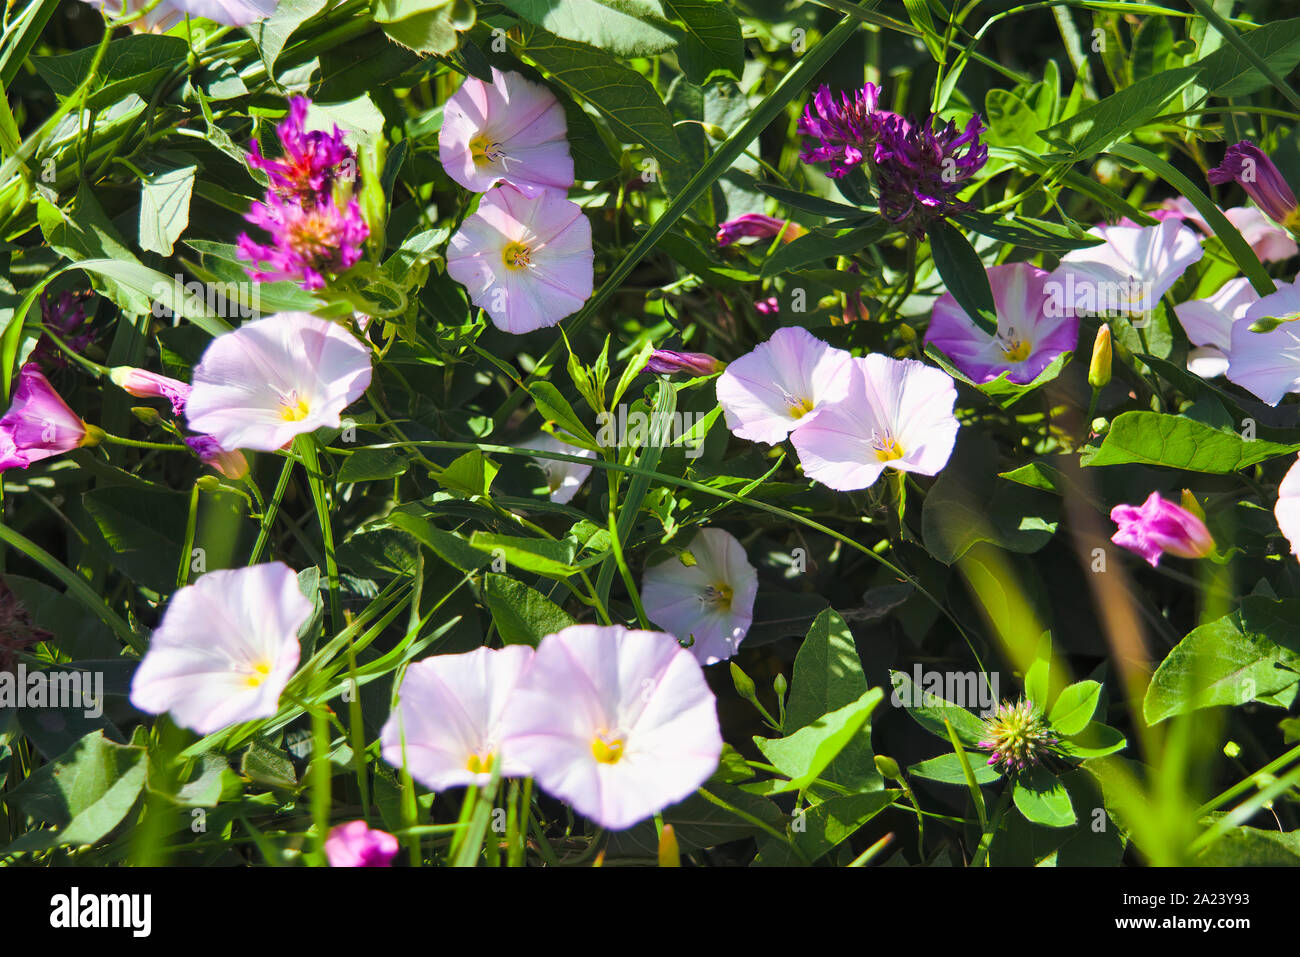 Pink blossoming field bindweed flowers. Field loach, Latin name Convolvulus arvensis to the meadow. Stock Photo